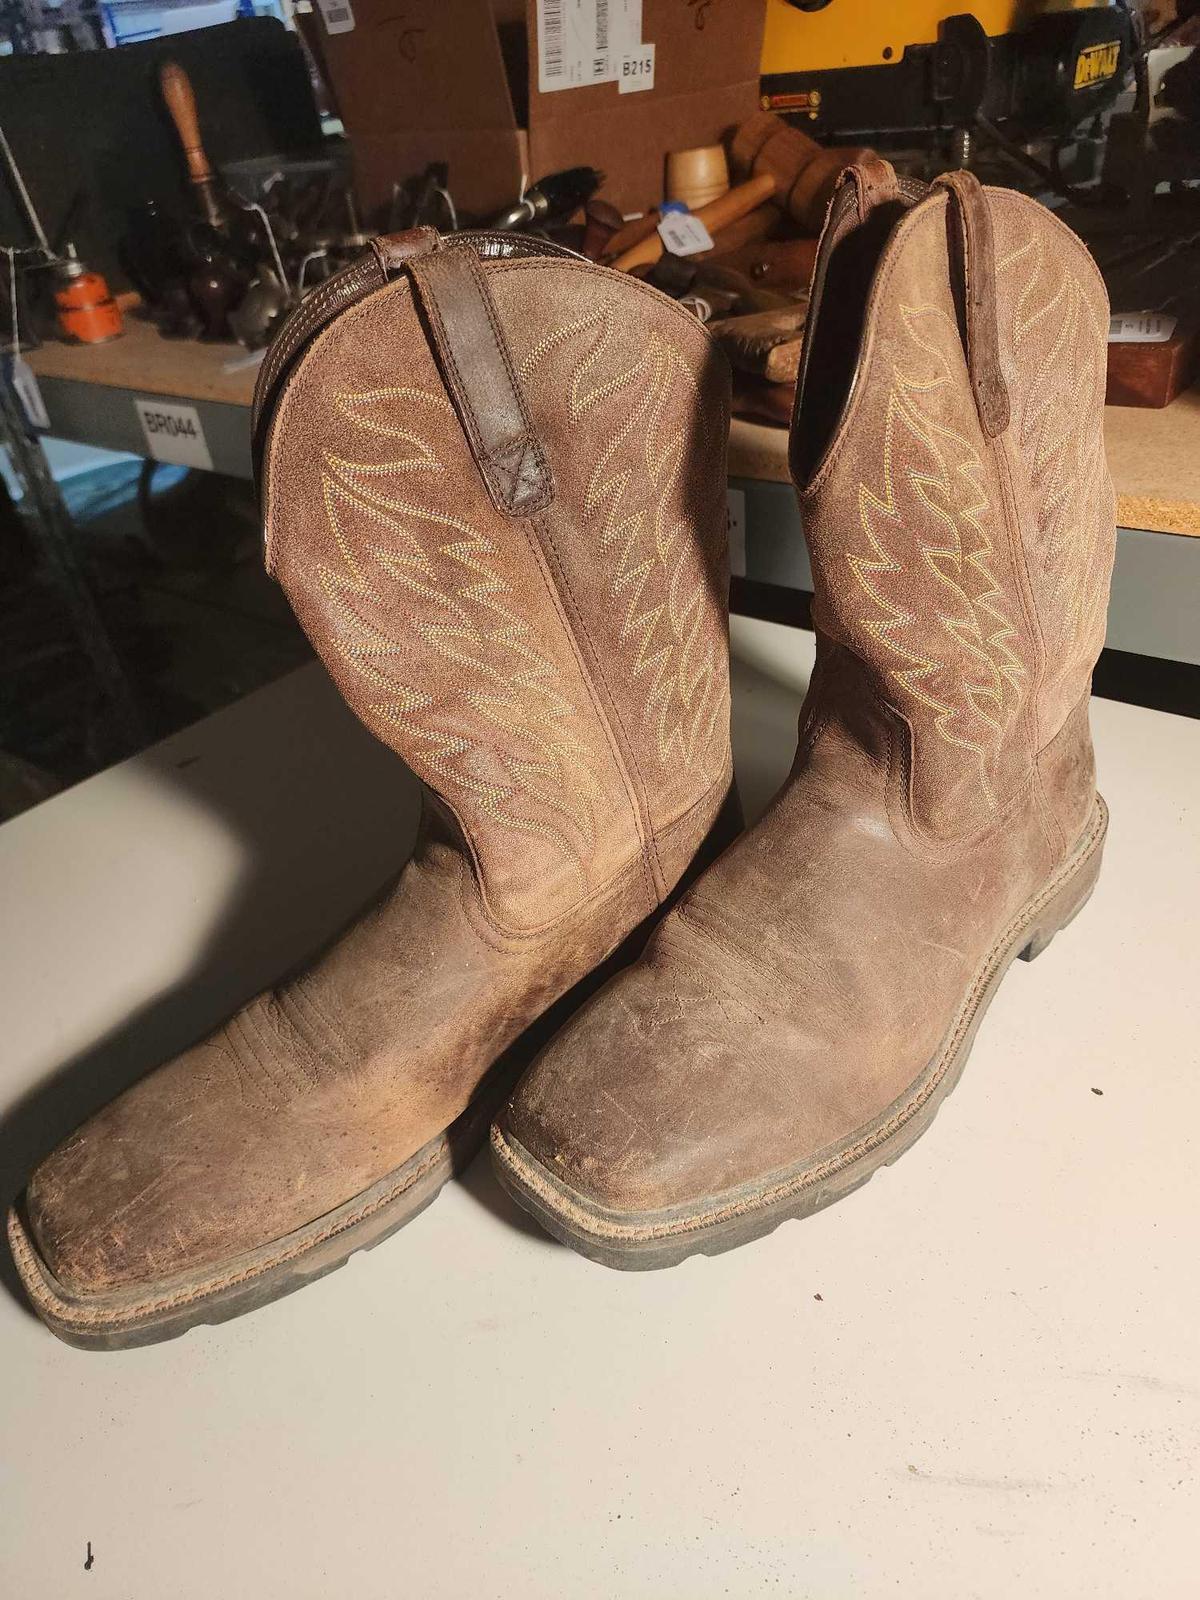 Pair of Ariat work boots size 12 Med. Used, but look to be in very good condition.